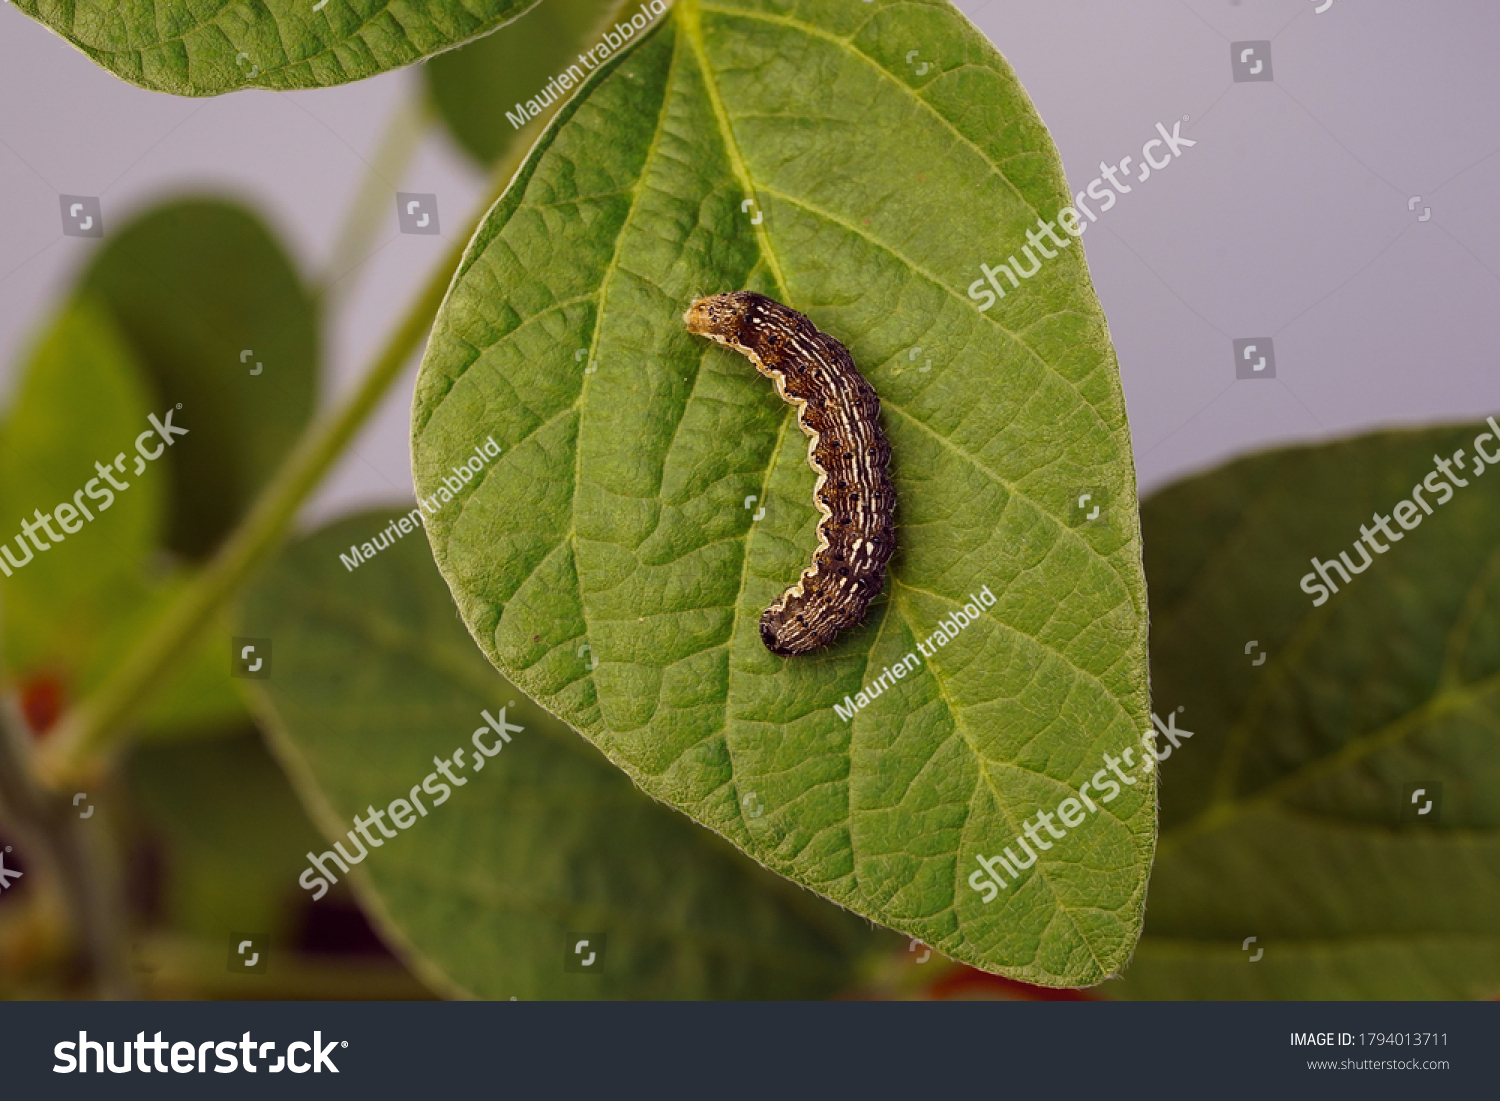 Cotton bollworm Helicoverpa armigera The cotton bollworm, corn earworm #1794013711